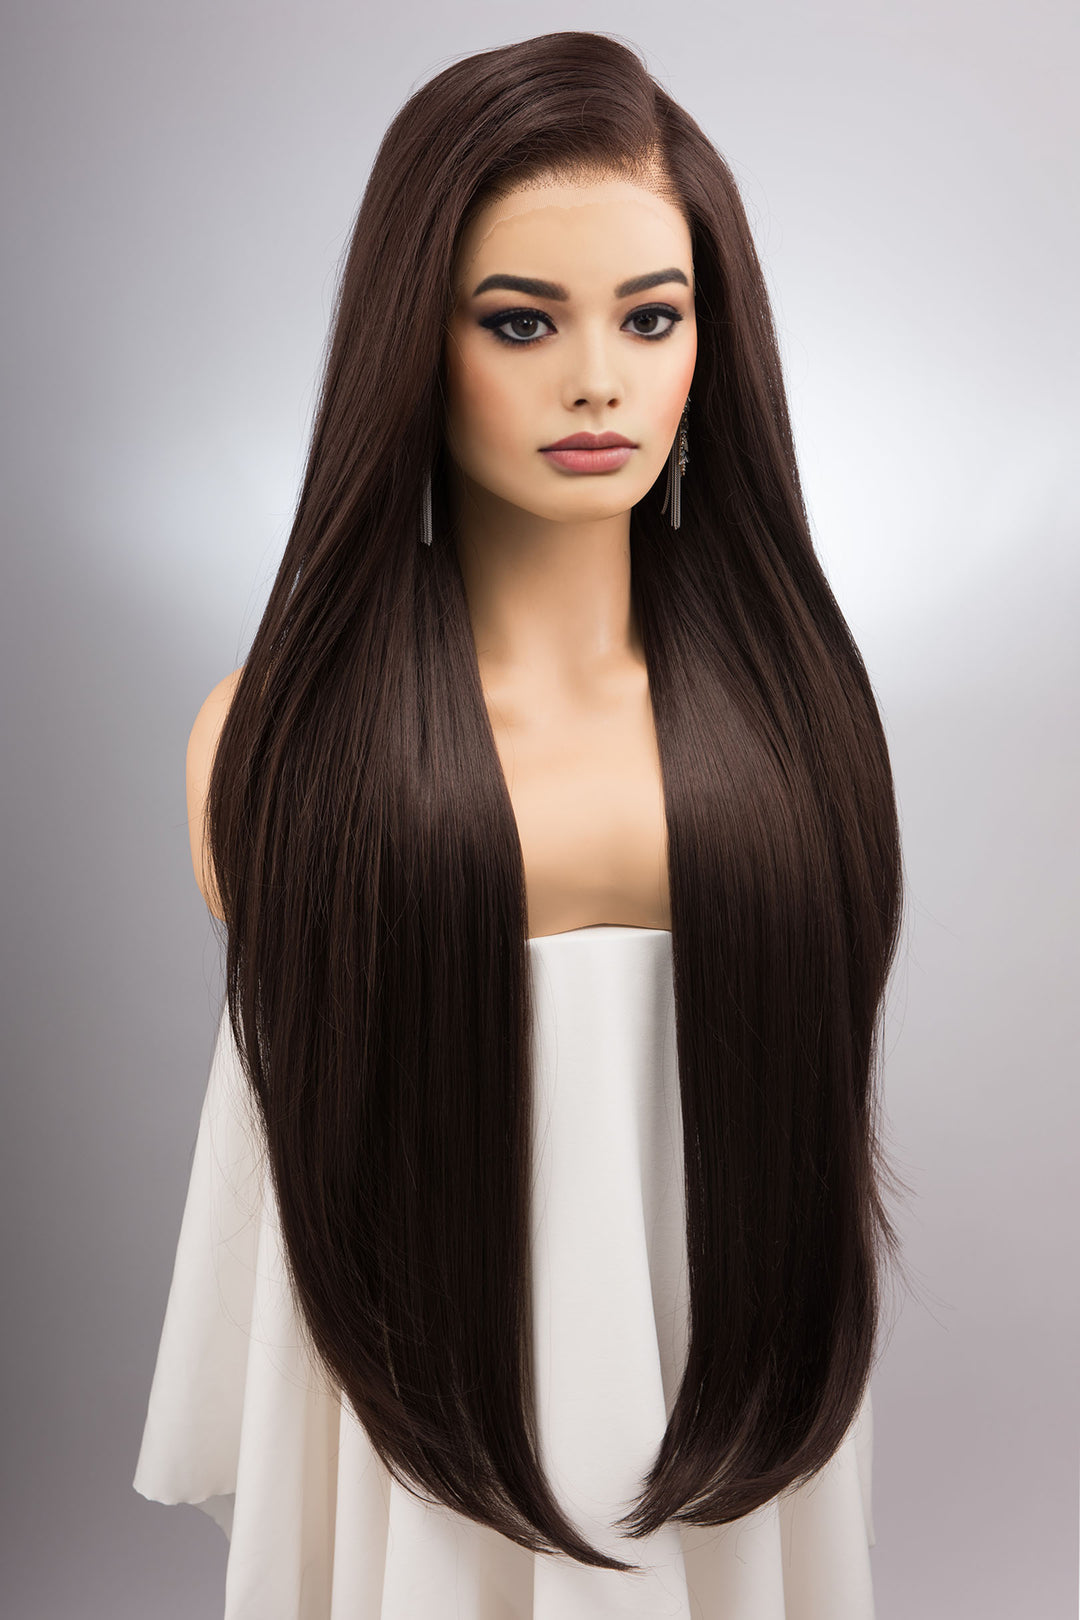 Chocolate Brown Straight 13" x 6" Lace Top Synthetic Hair Wig Morgan